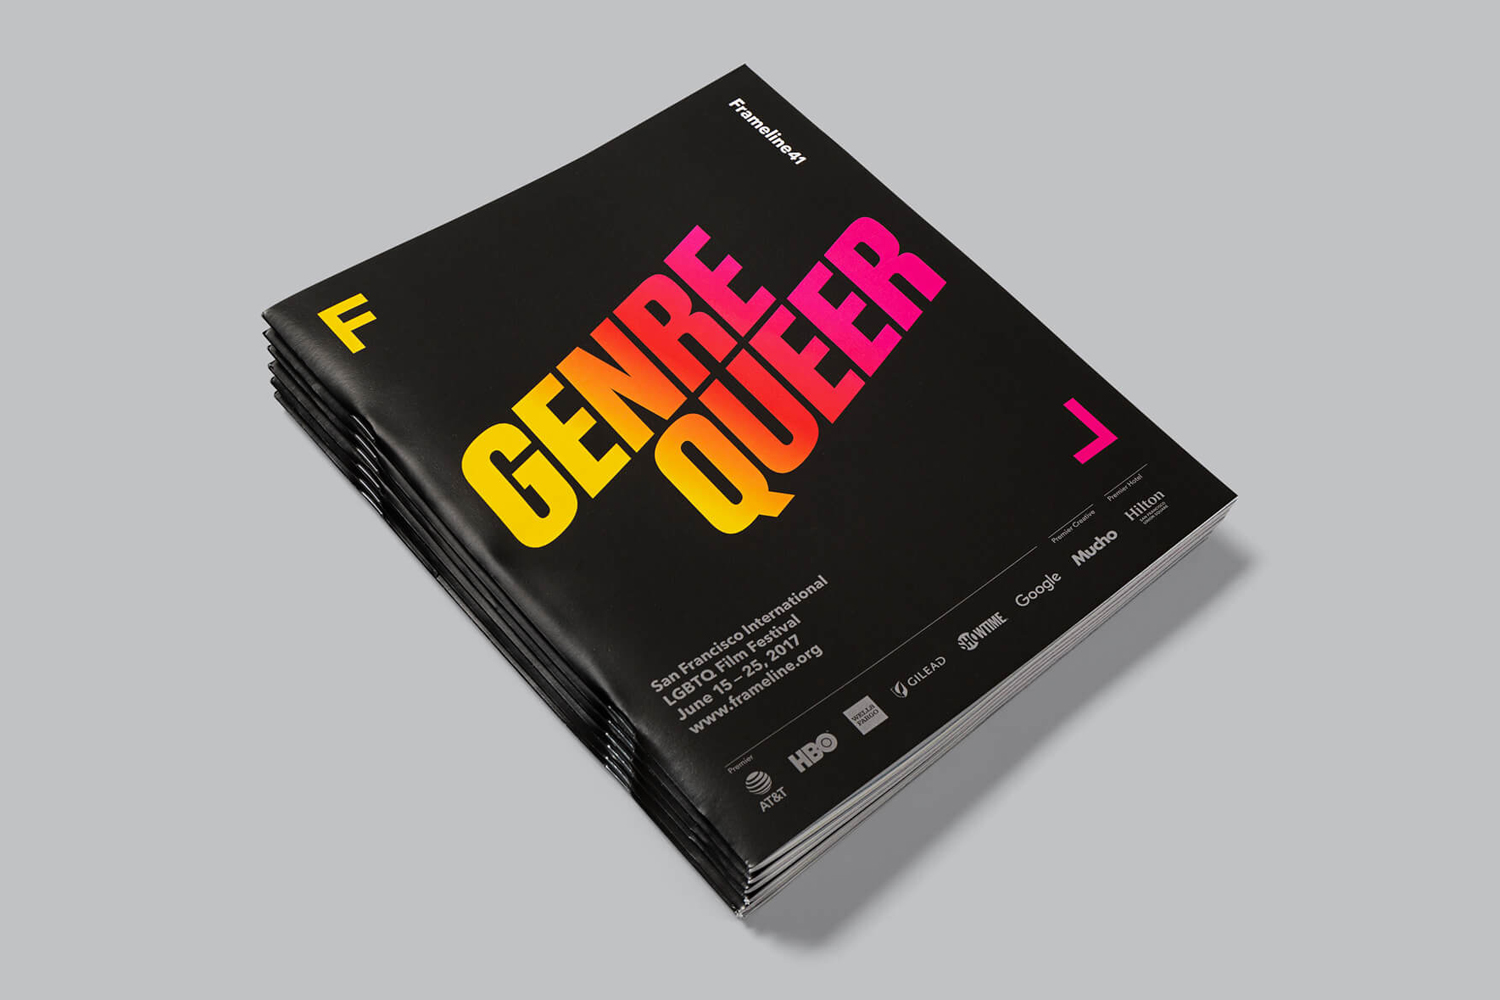 Visual identity, campaign and print by Mucho for San Francisco based LGBT film festival Frameline 41.